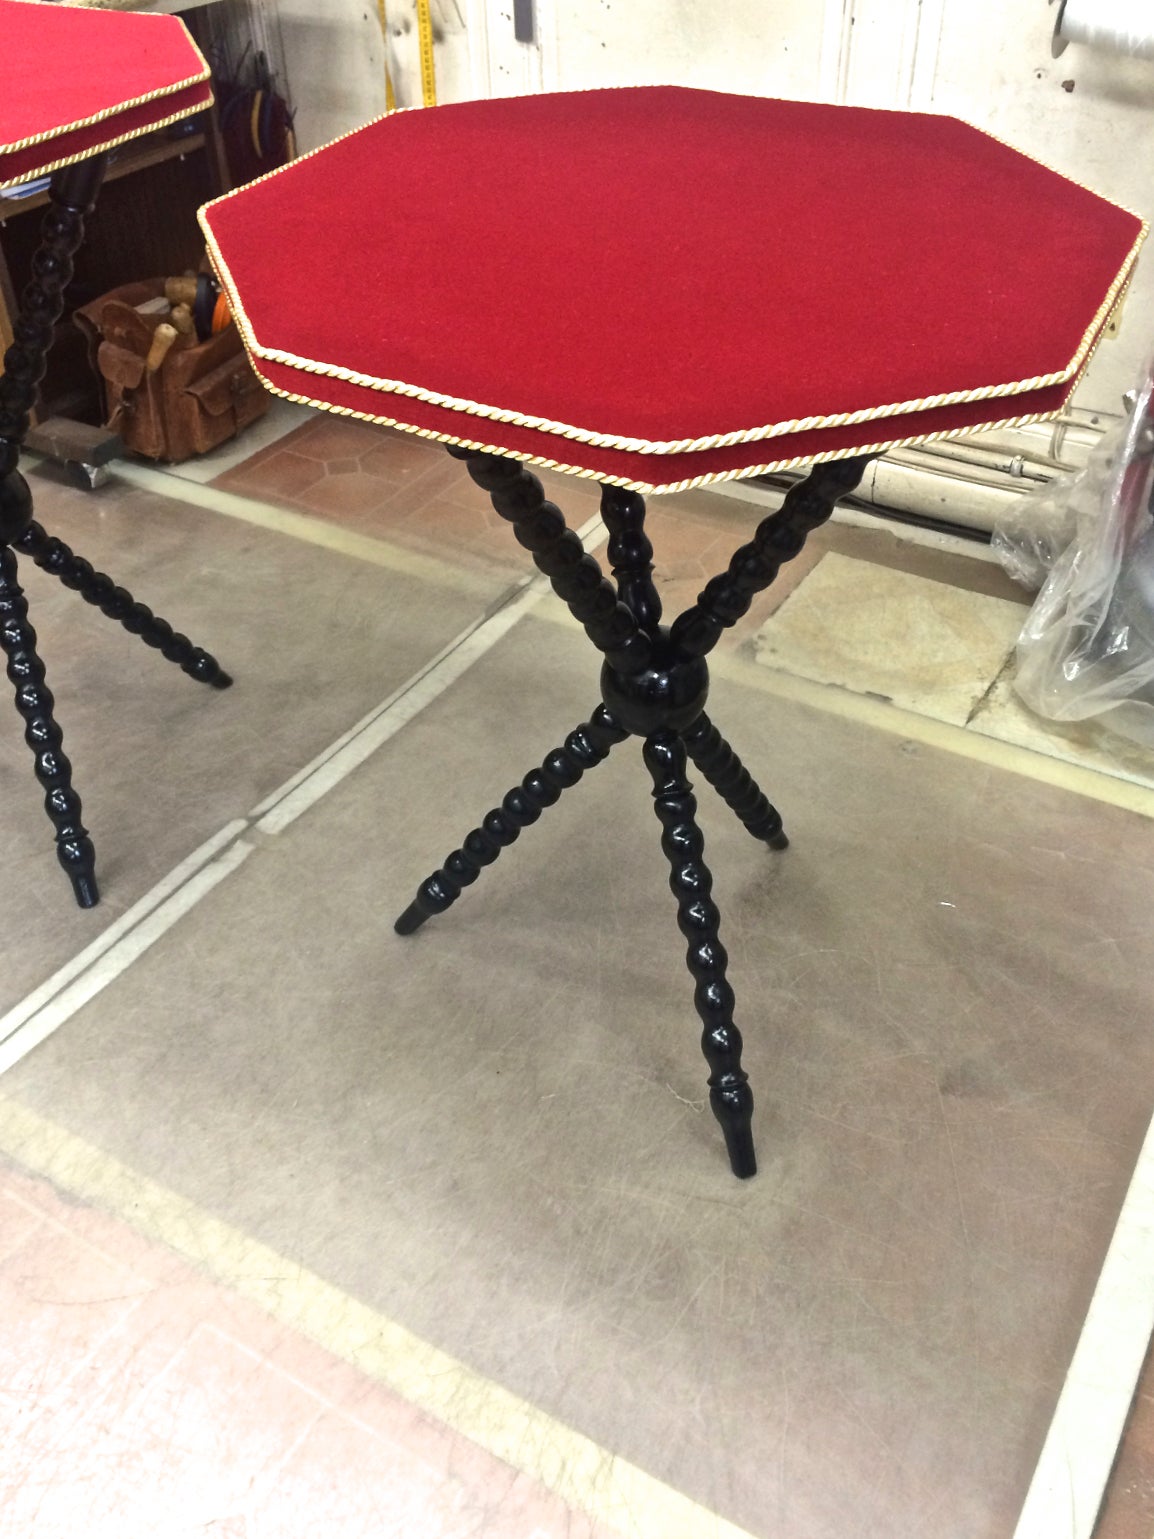 Pair of Neoclassic Side Tables with Red Velvet Top, 1940s For Sale 2